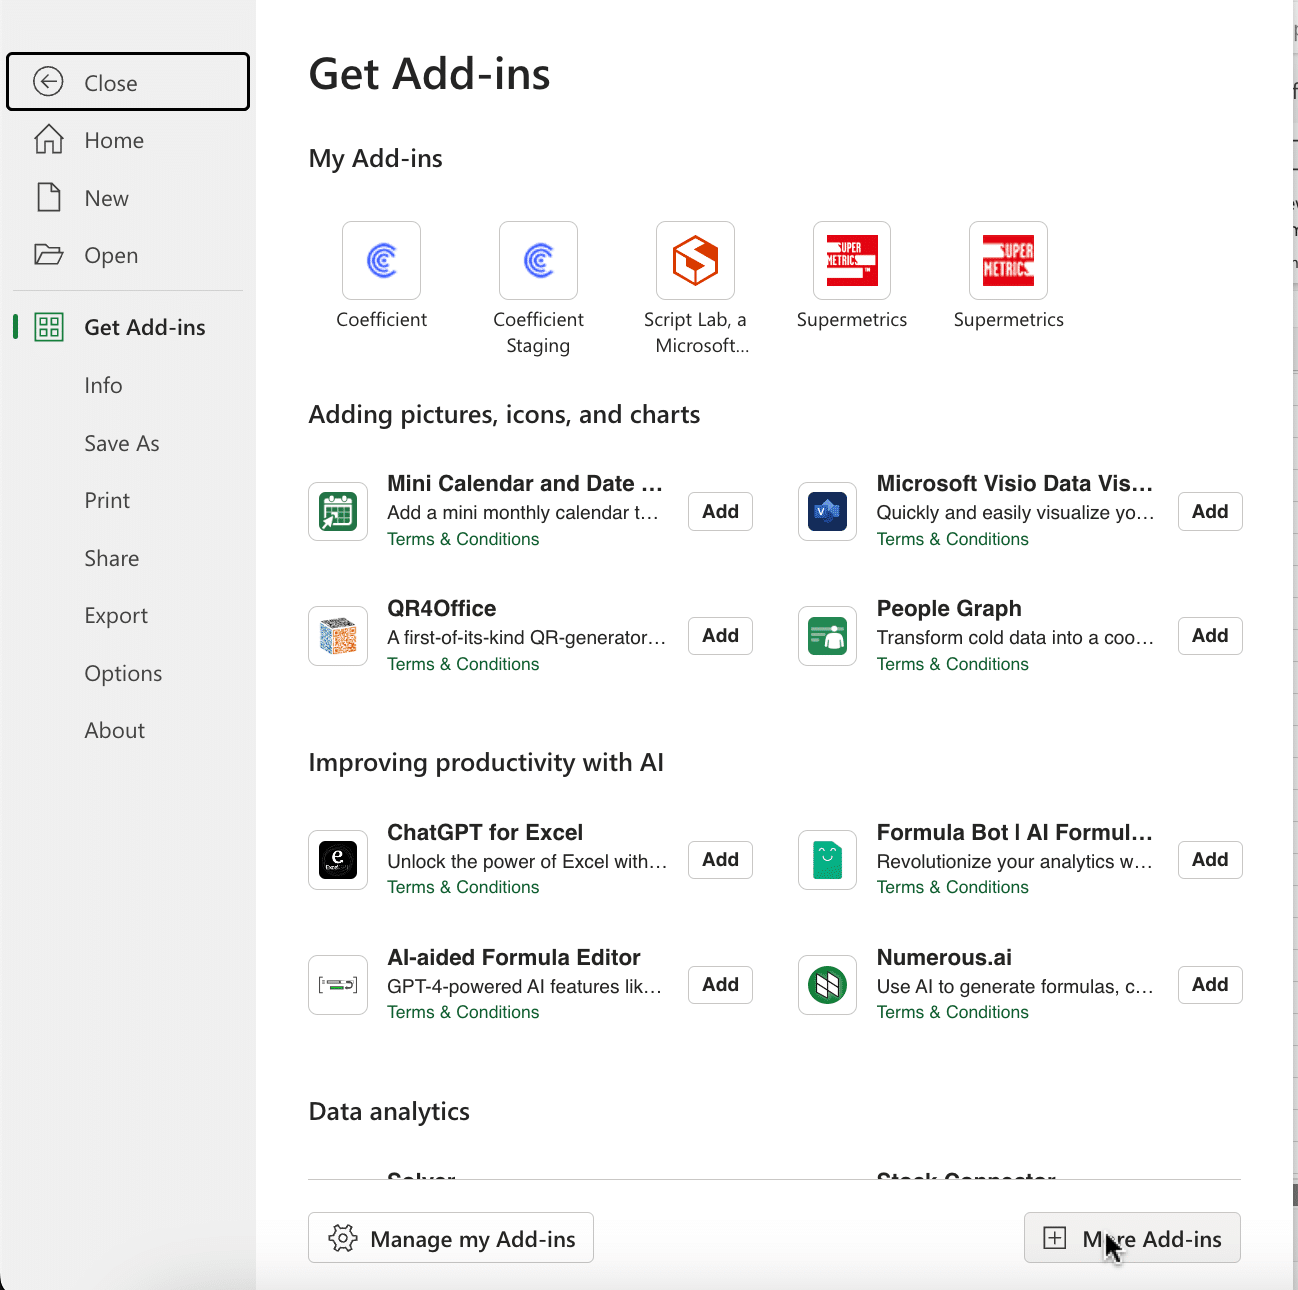 Opening Microsoft Excel and navigating to File > Get Add-ins > More Add-Ins.